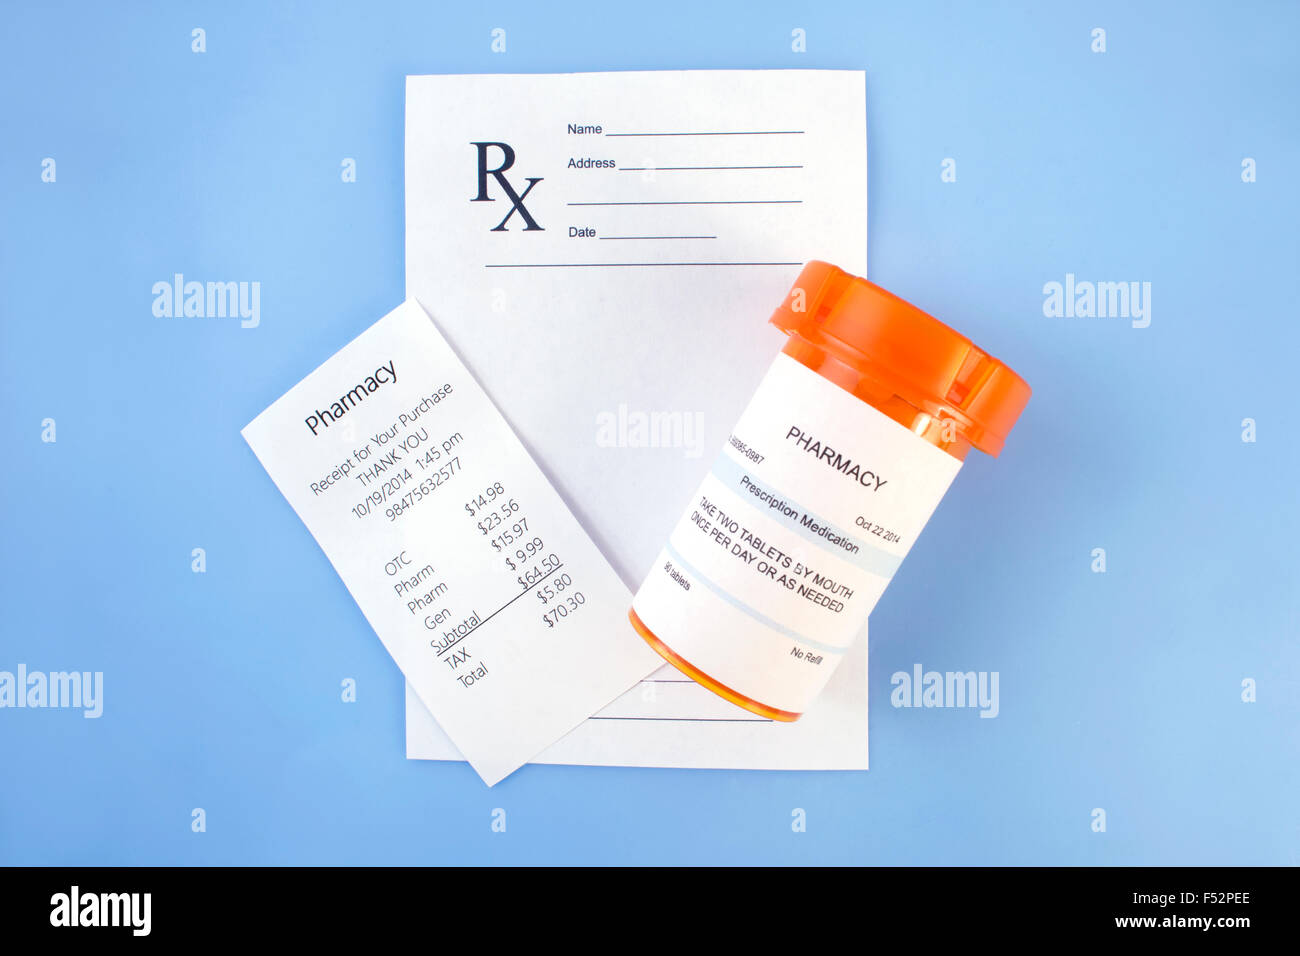 Pharmacy receipt with prescription bottle and receipt on blue. Stock Photo